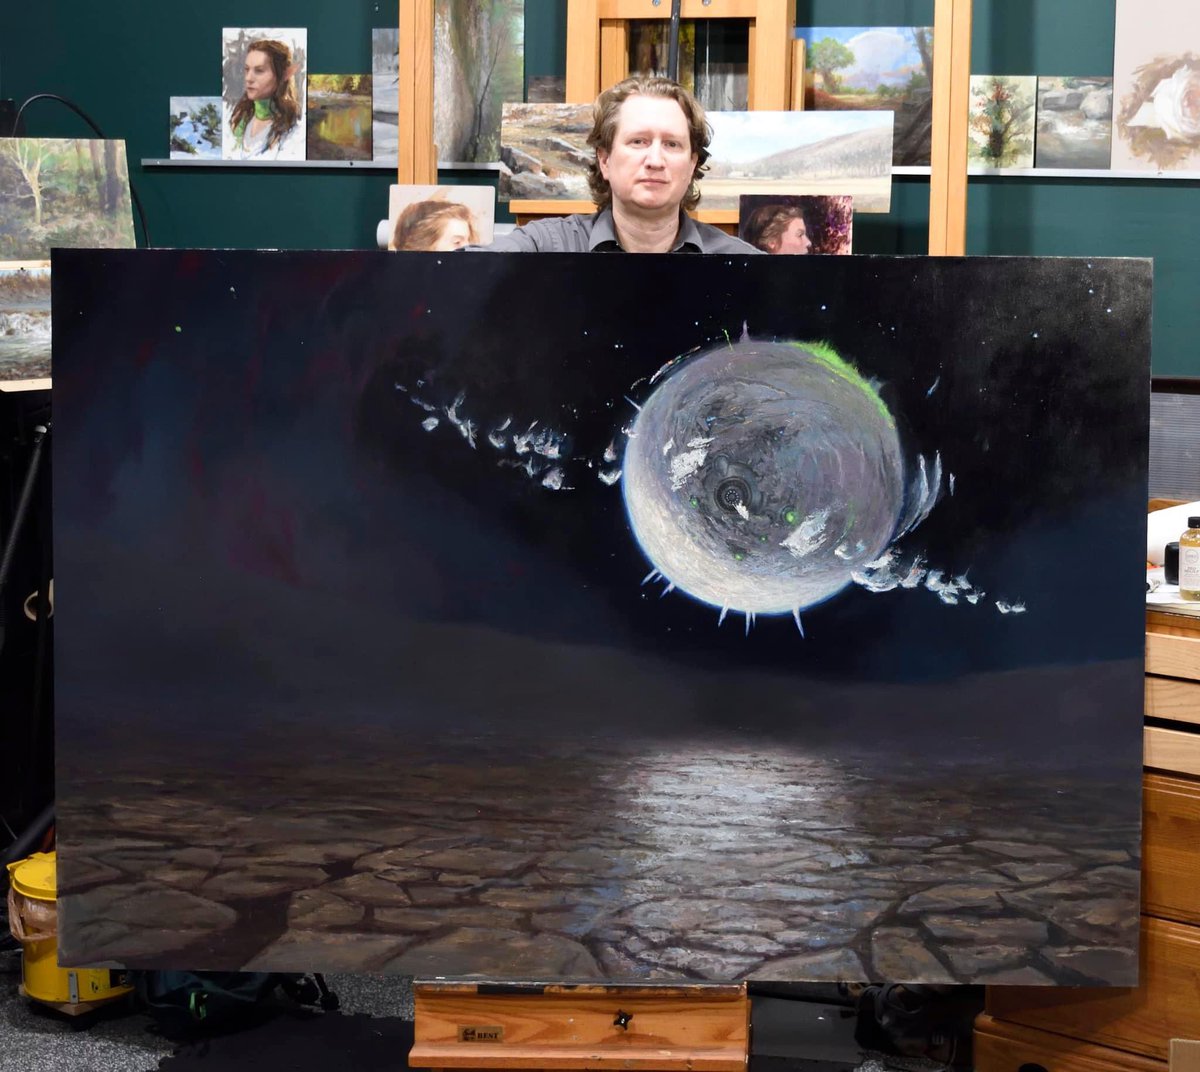 “Winter Moon” by Drew Baker from the upcoming MH3 set is 4’ x 6’ — purportedly the largest original painting for Magic so far.